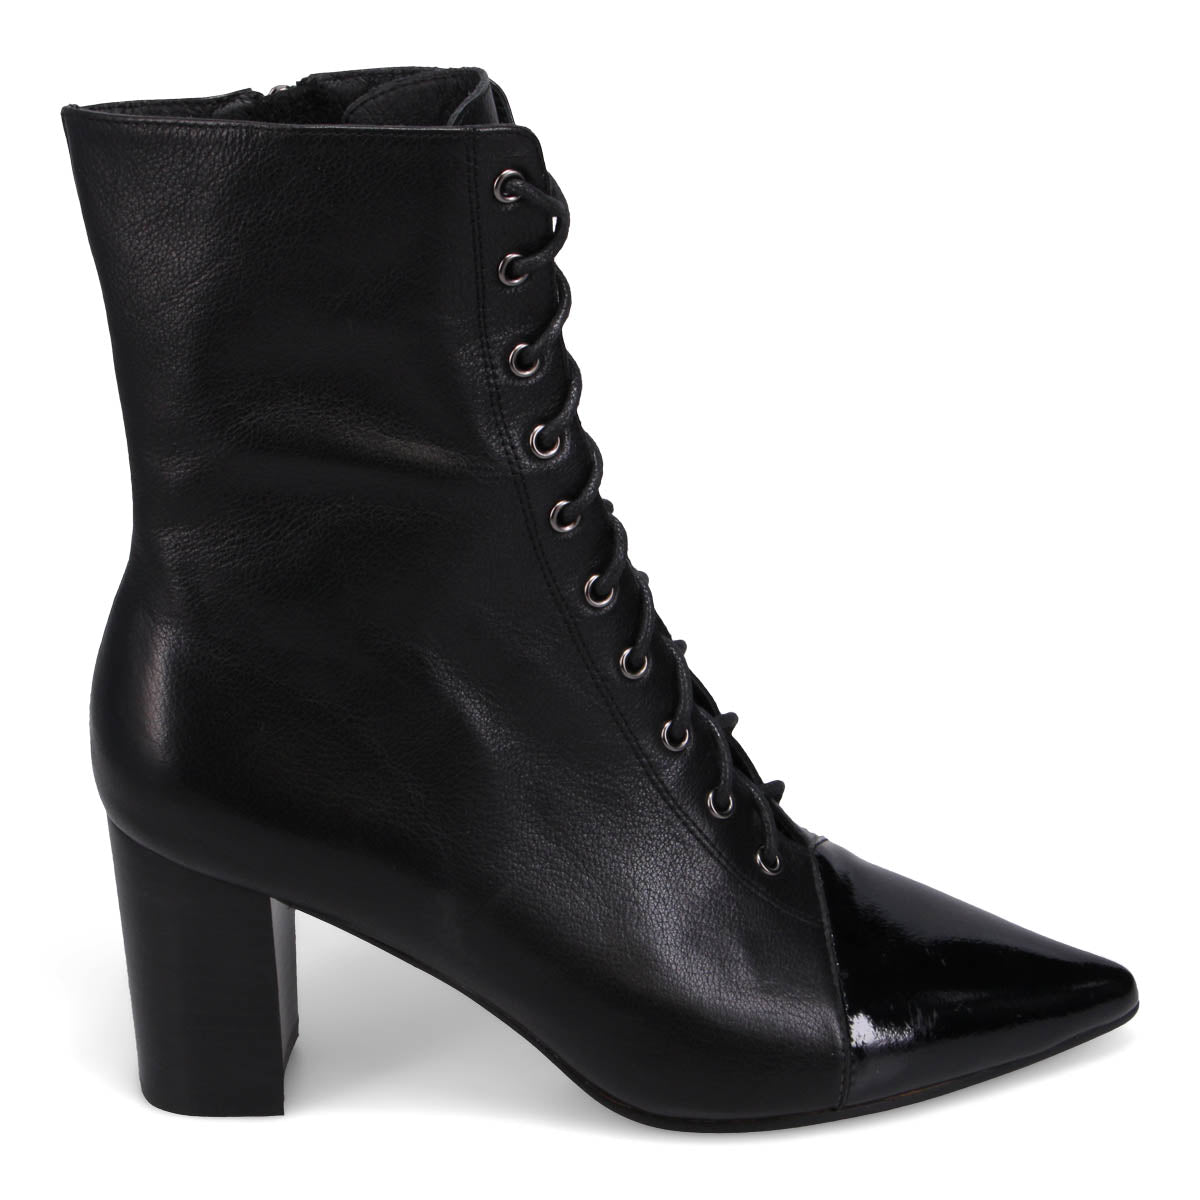 BLACK PATENT LEATHER | Right